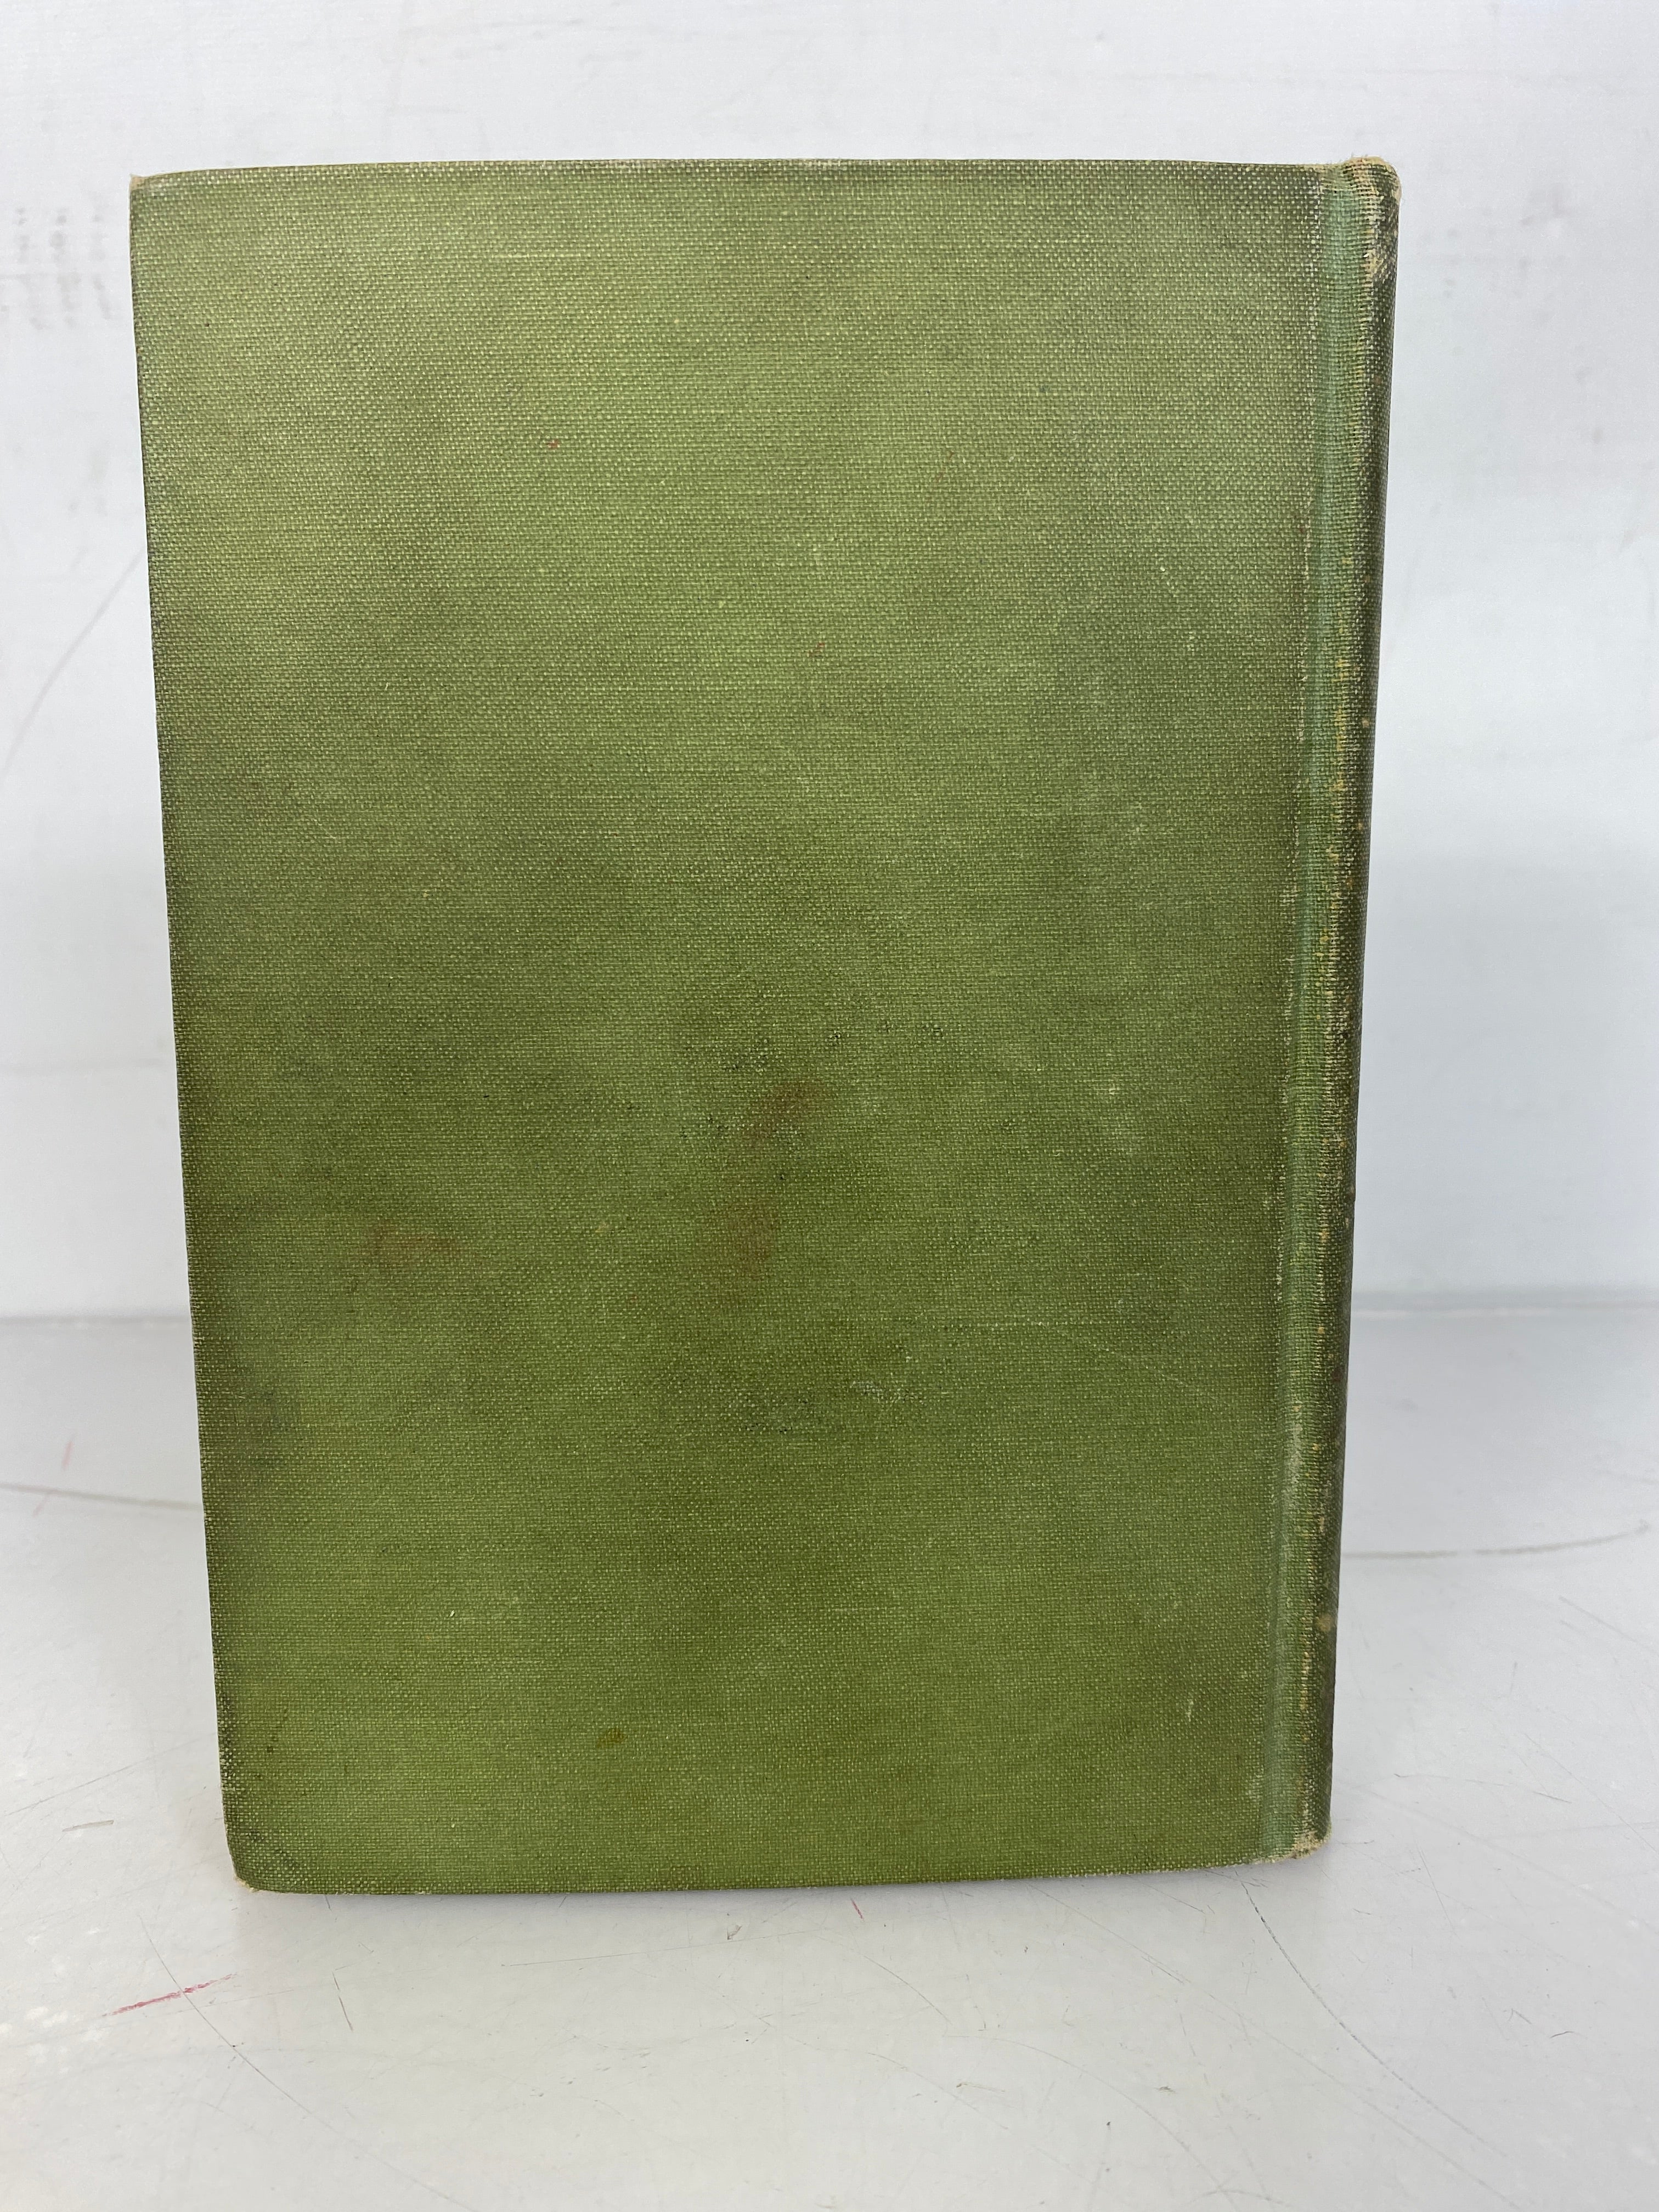 Animal Husbandry for Schools by Merritt Harper New and Revised Edition 1931 HC